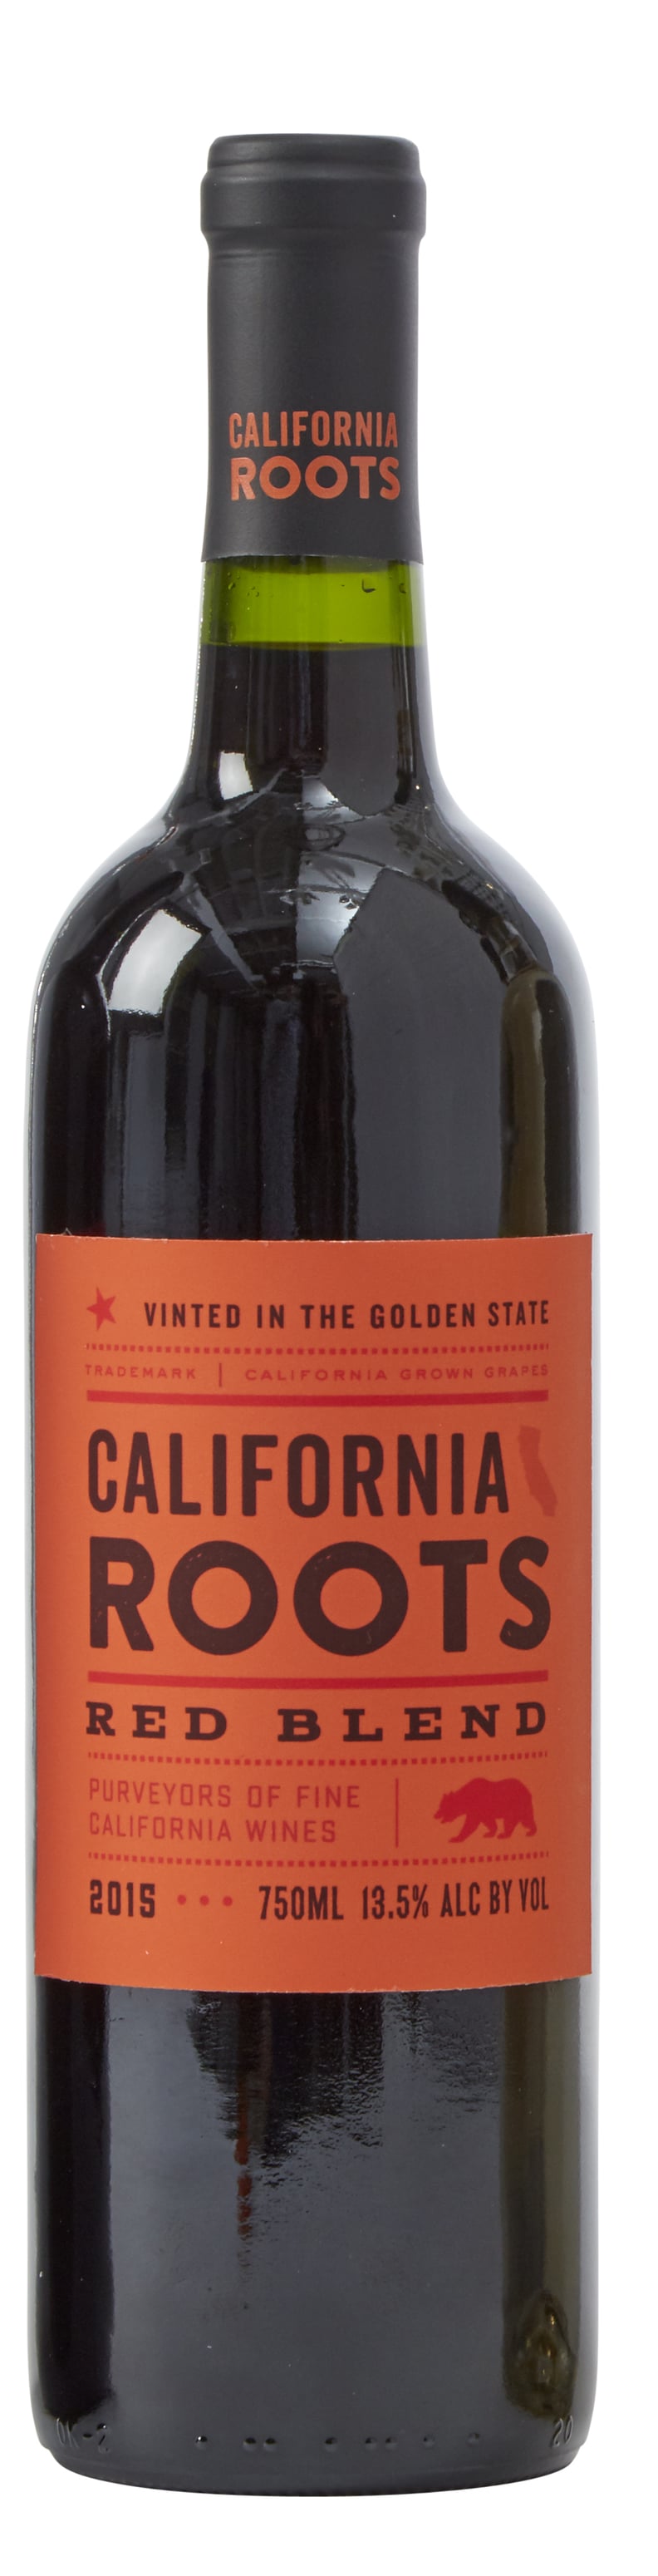 California Roots Red Blend